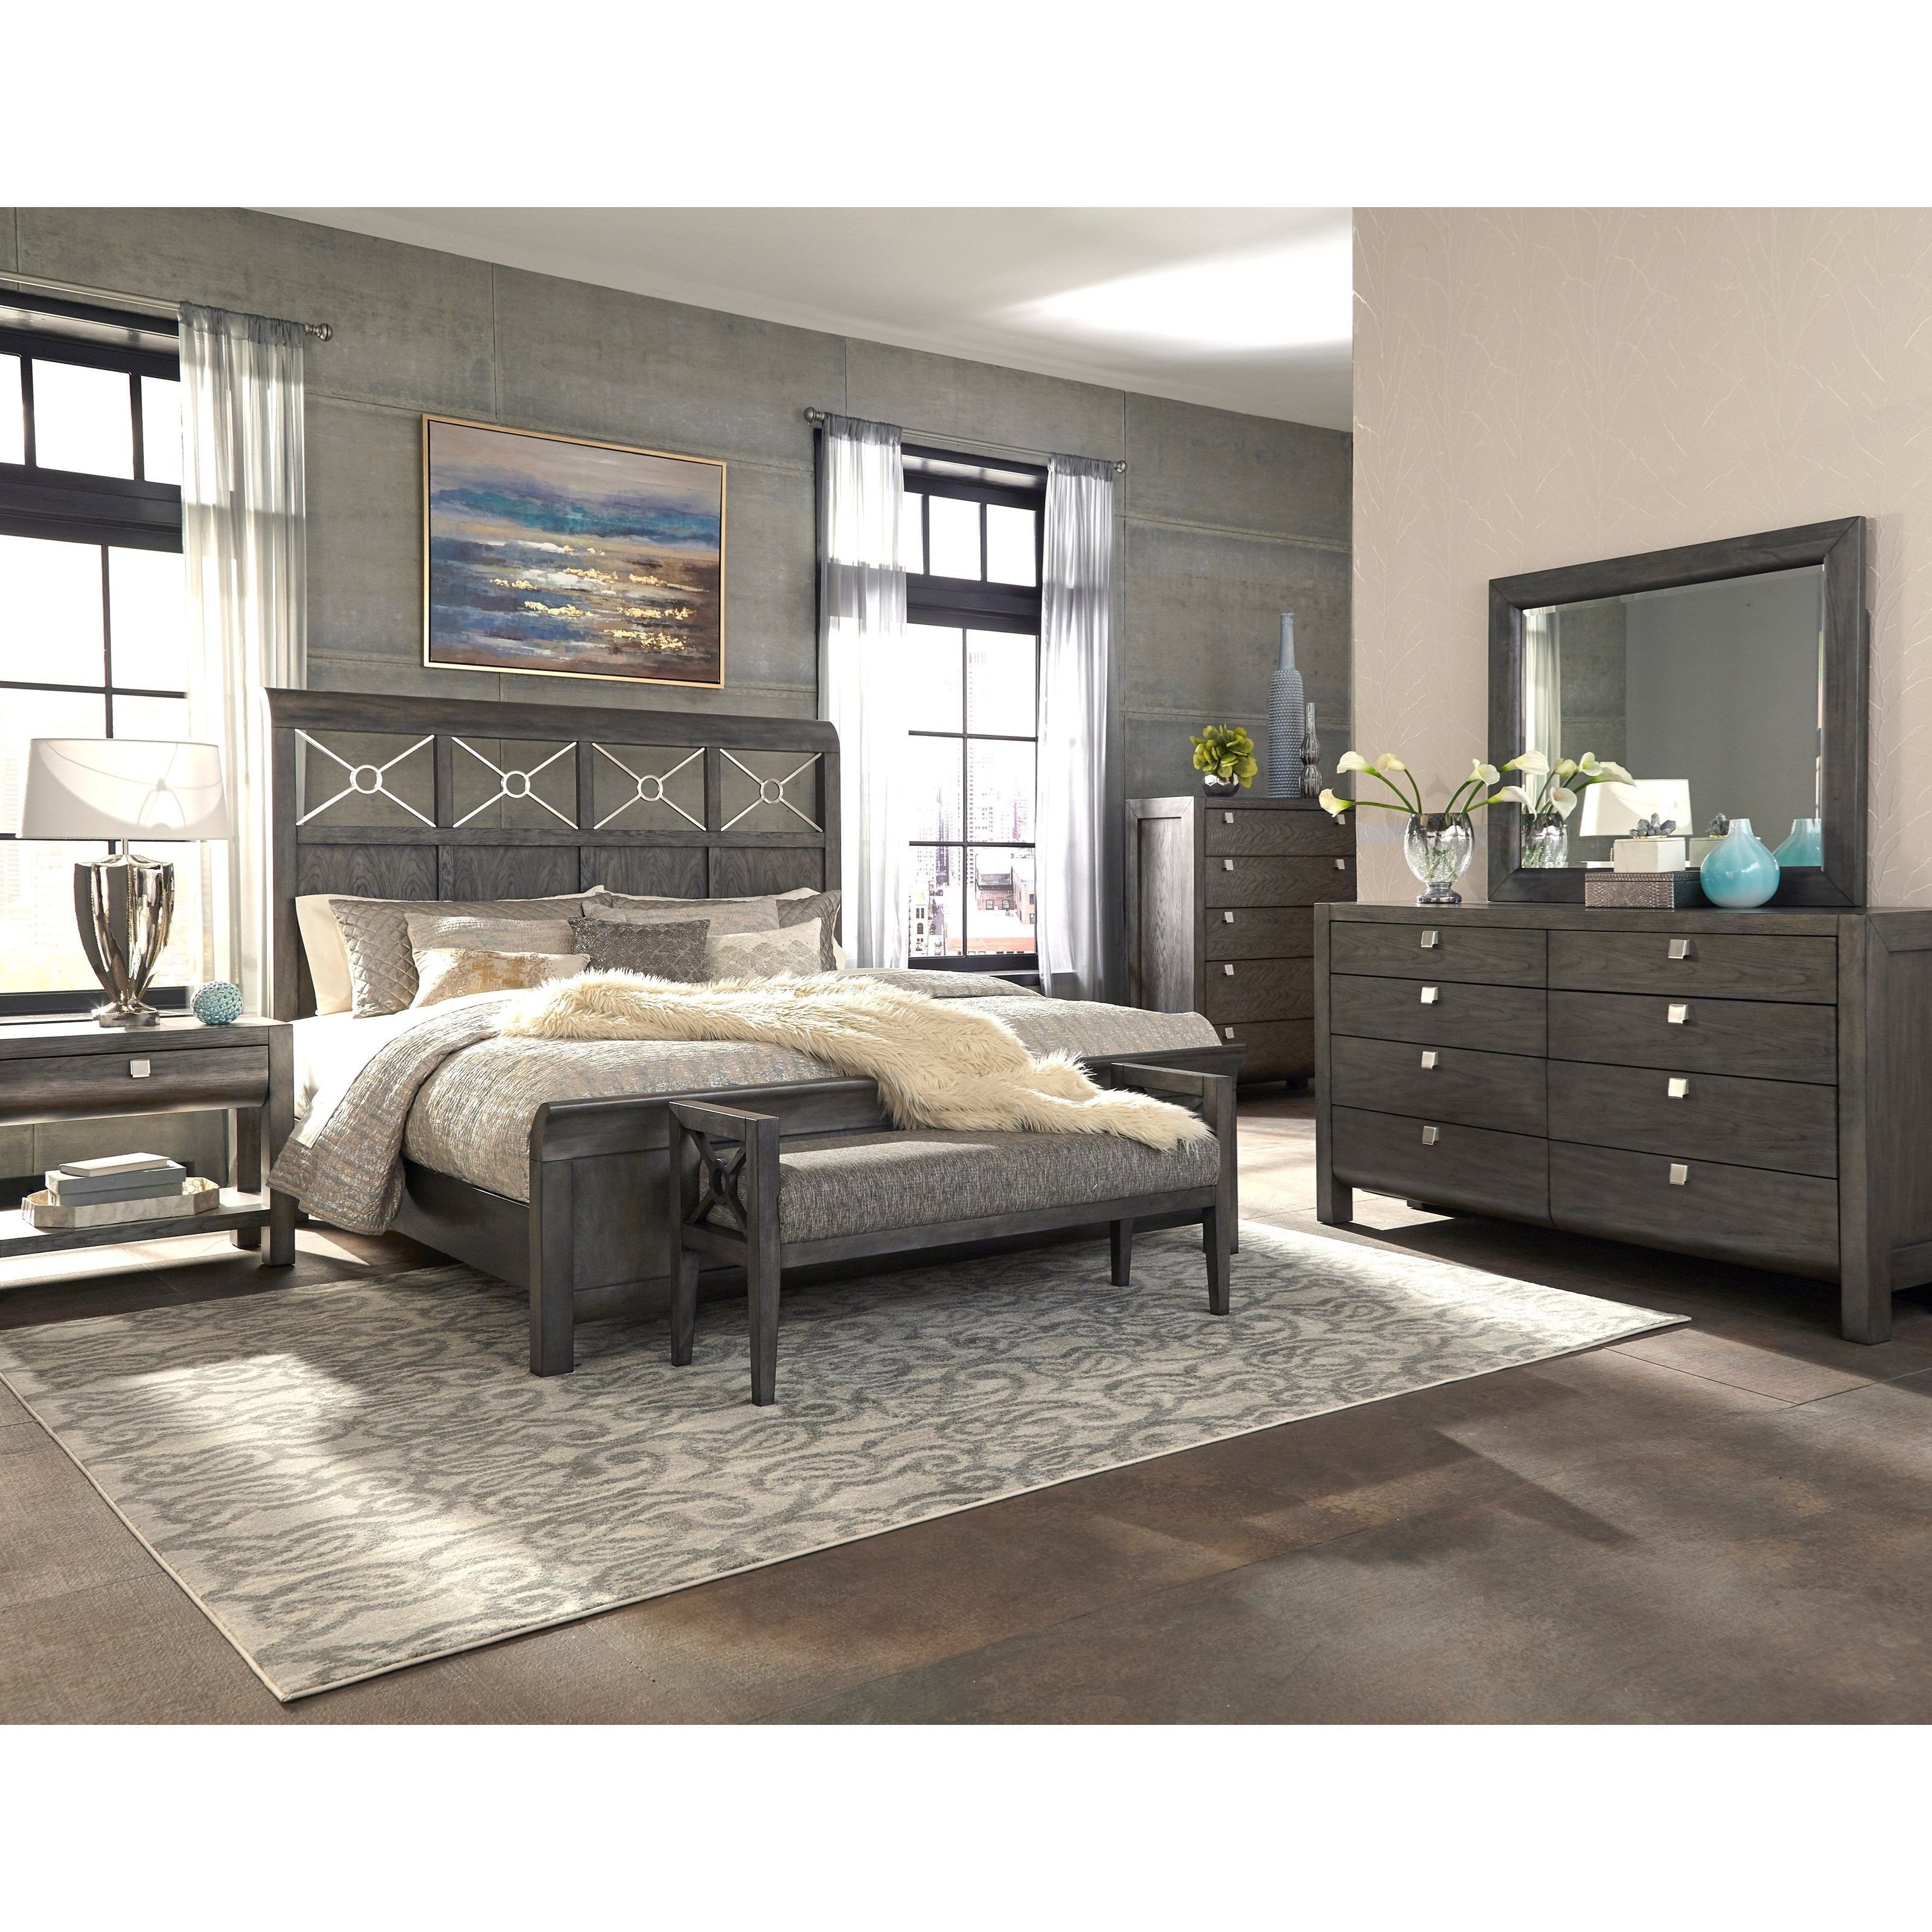 Complete Bedroom Furniture Set Beautiful Music City Queen Bed Plete by Trisha Yearwood Home